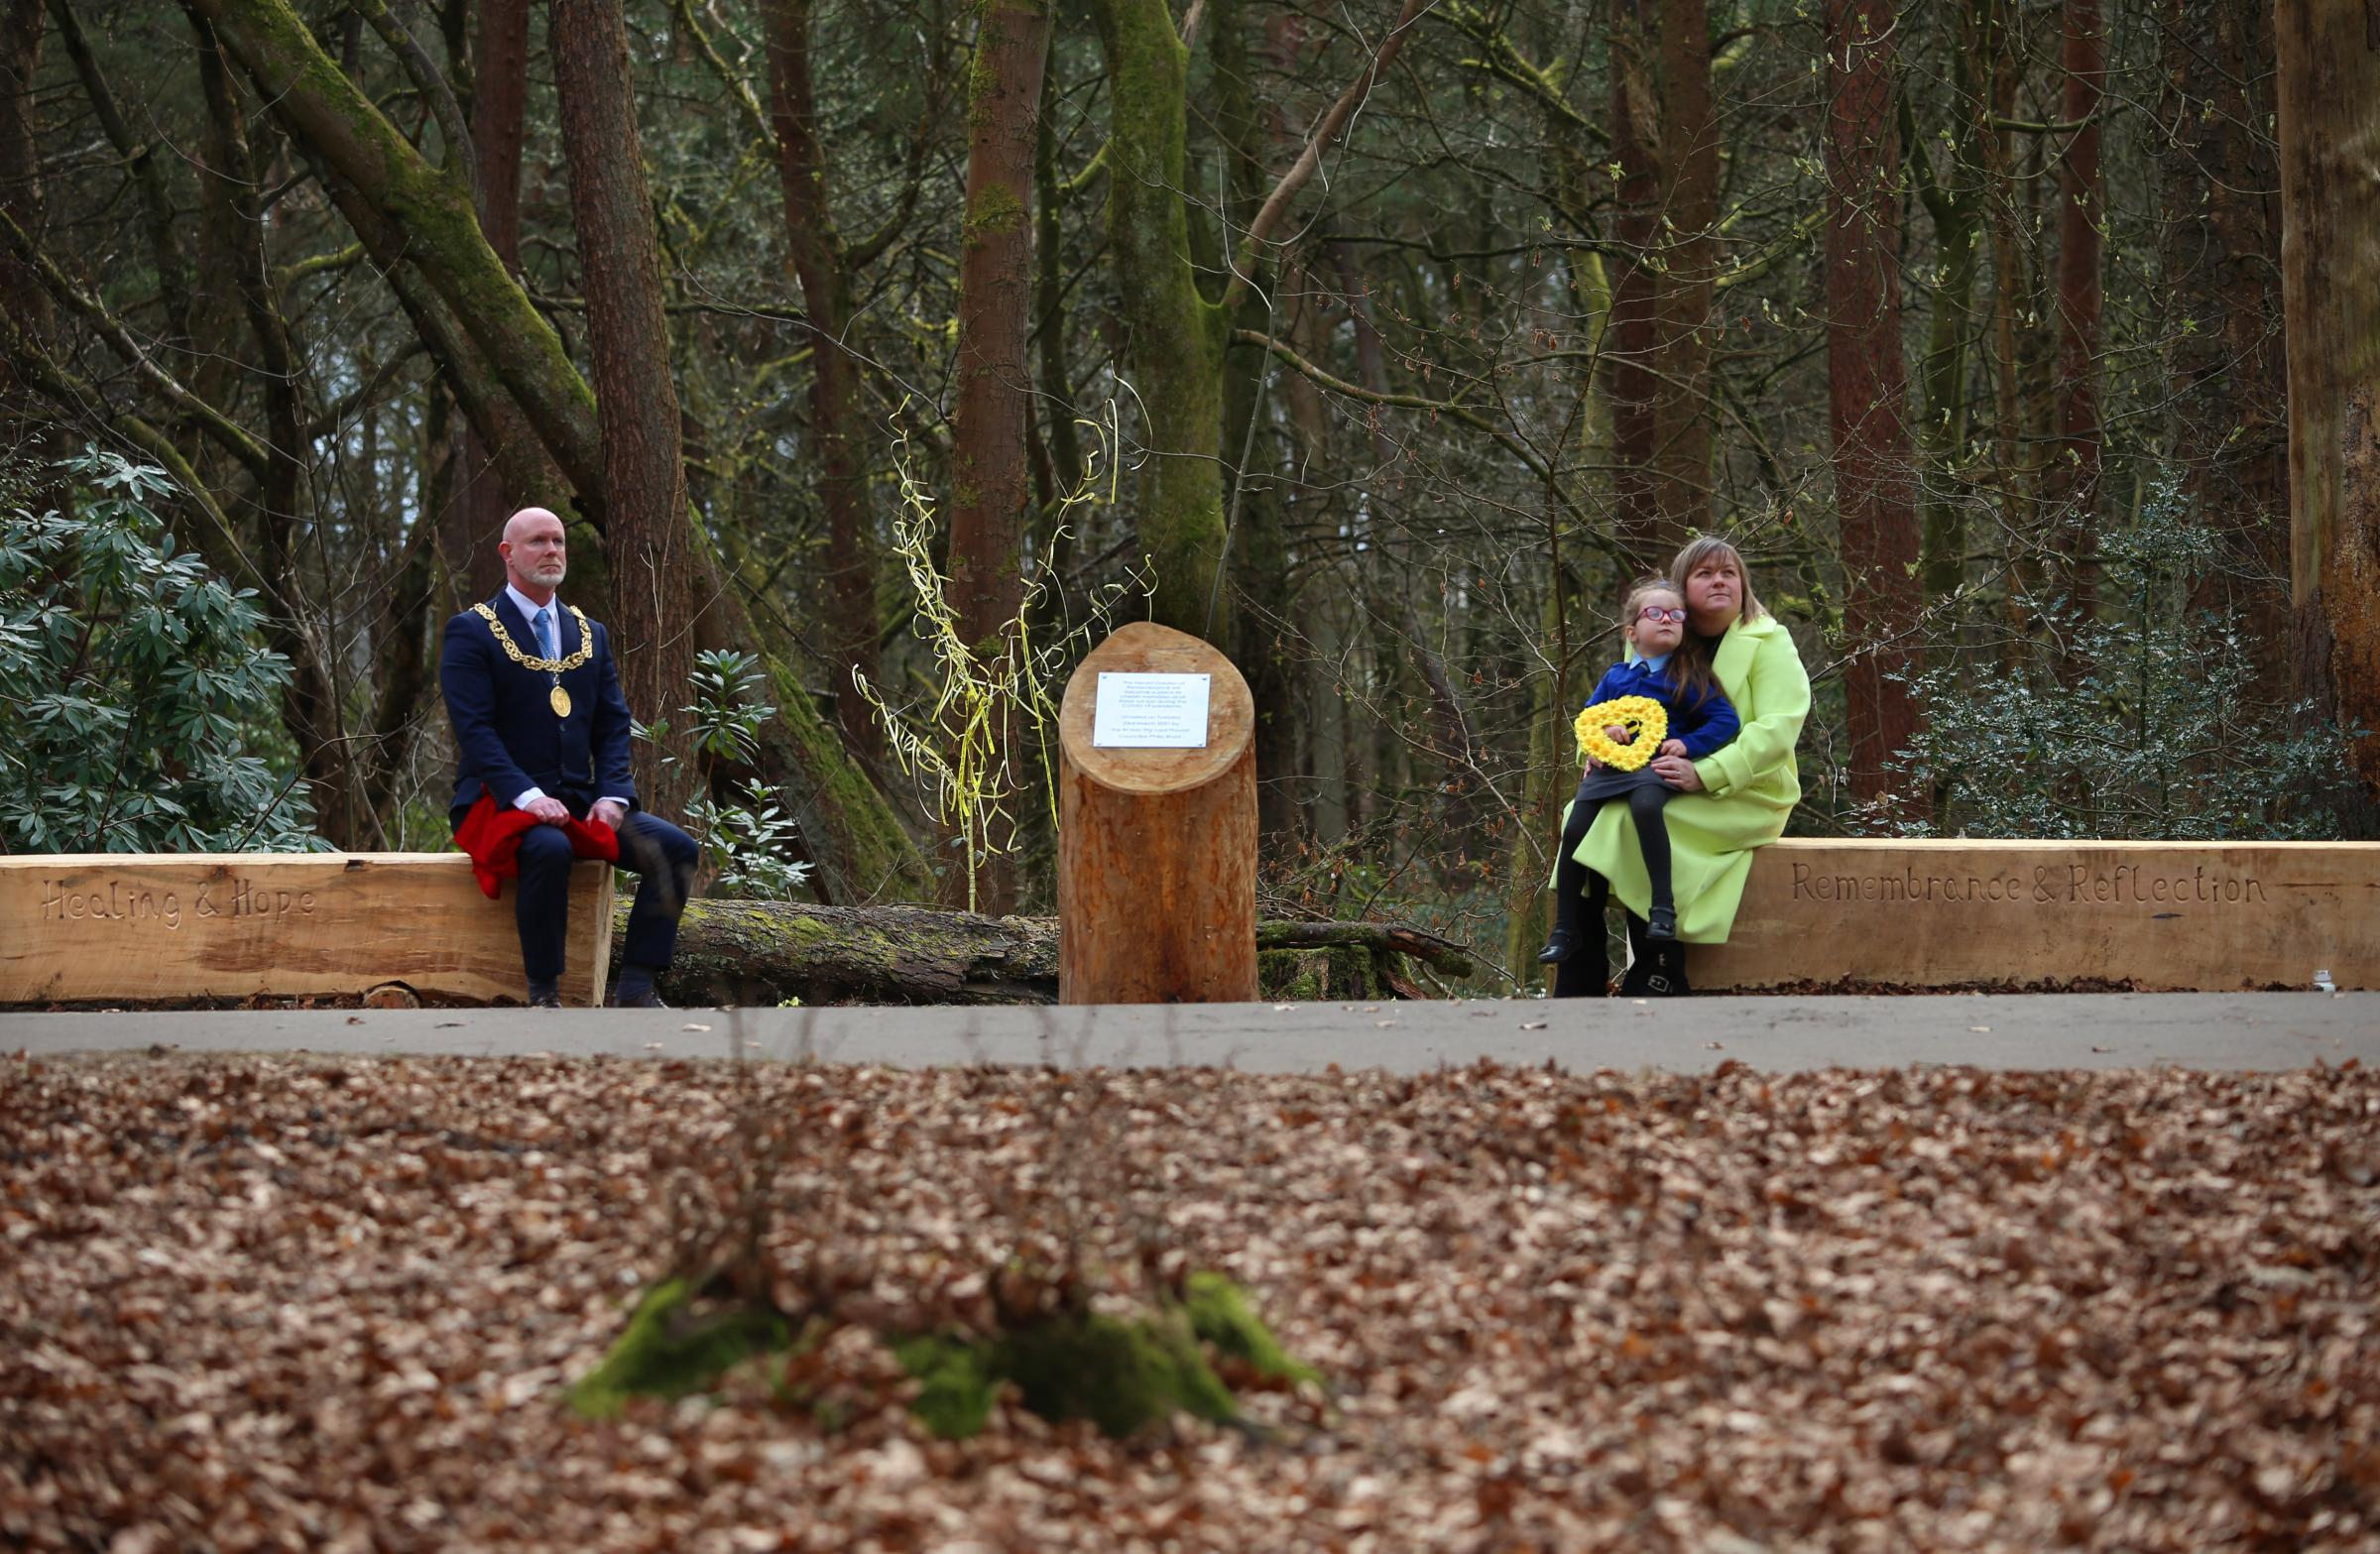 The plaque unveiled by Lord Provost of Glasgow Philip Braat in Pollok Park with Connie McCready and Jessica Machon. Photo by Gordon Terris.